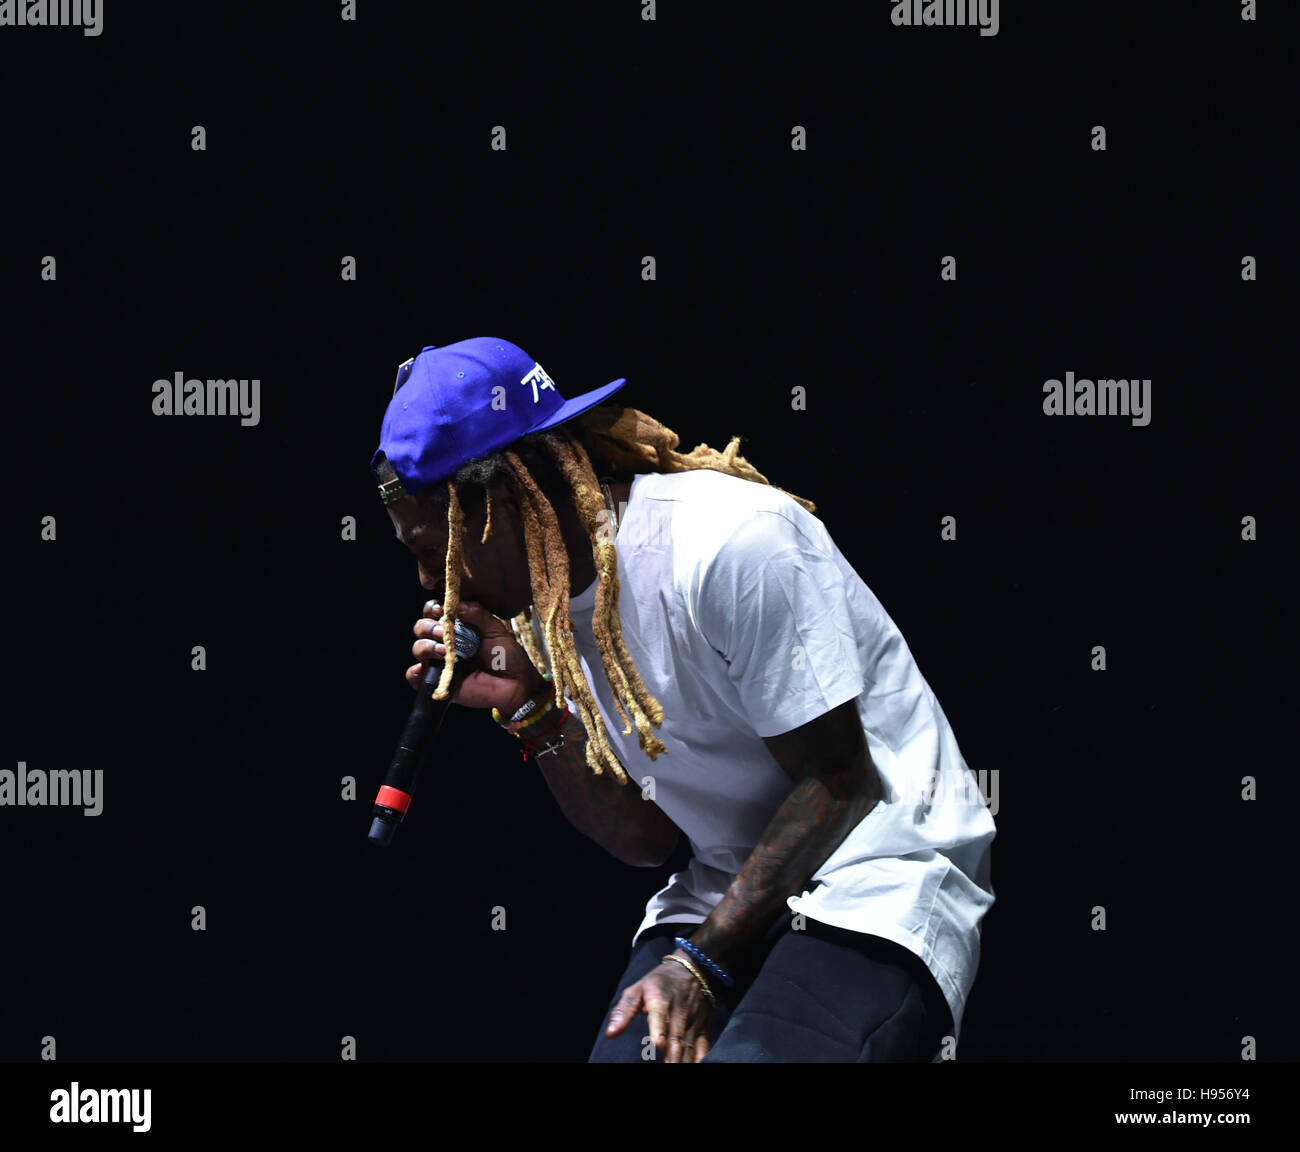 Norfolk, VIRGINIA, USA. 18th Nov, 2016. LIL WAYNE, grammy winner brings the rap to the CONSTANT CENTER at OLD DOMINION UNIVERSITY in NORFOLK, VIRGINIA on 17 OCTOBERL 2016. © Jeff Moore/ZUMA Wire/Alamy Live News Stock Photo